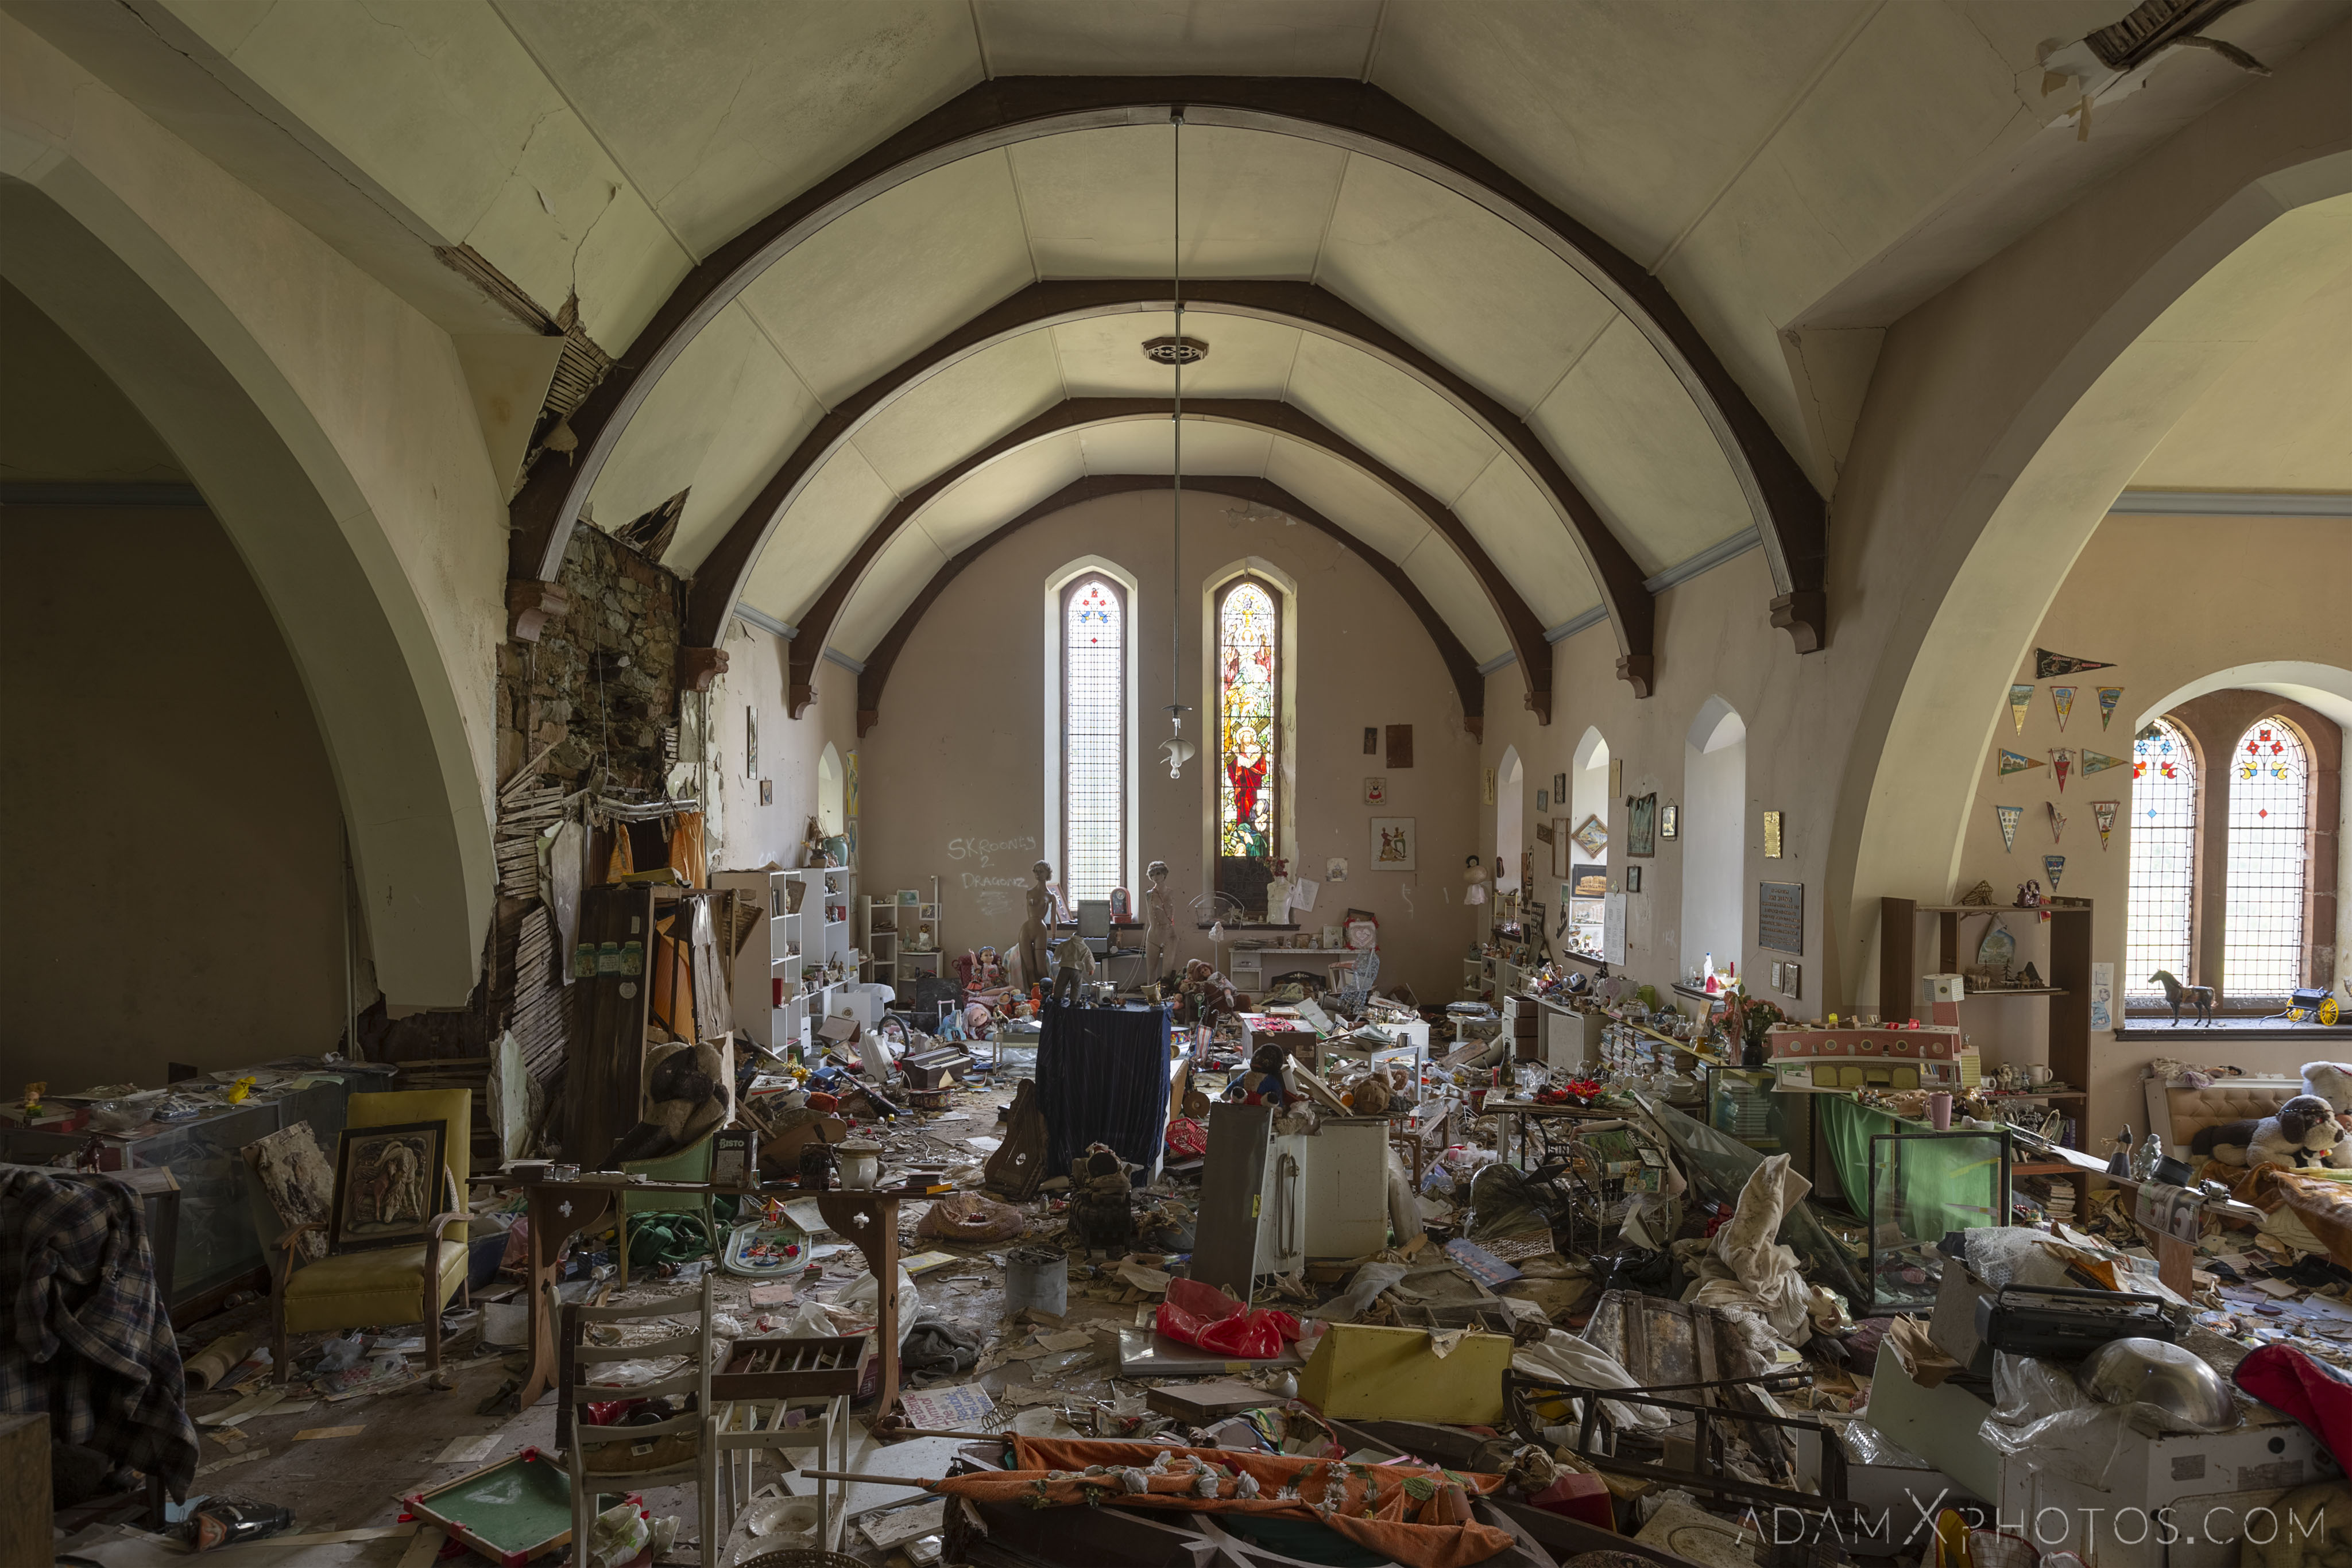 main hall bed soft toys ornaments books stained glass windows Elvanfoot Parish Church Hoarder Hoarders Church Adam X Urbex Urban Exploration Access 2018 Abandoned decay lost forgotten derelict location creepy haunting eerie